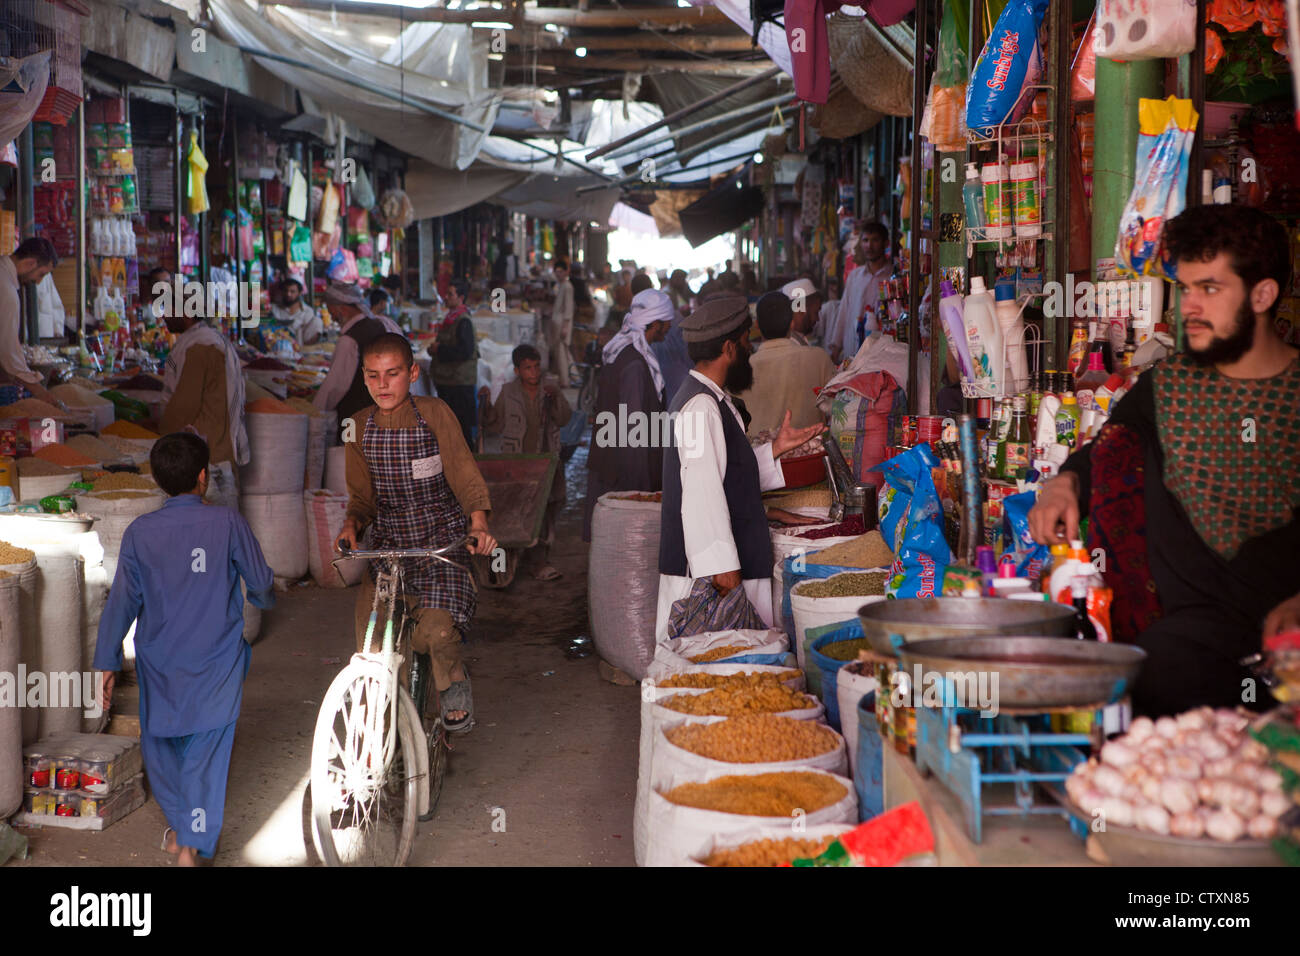 Market In Downtown Kunduz Afghanistan High Resolution Stock Photography and  Images - Alamy